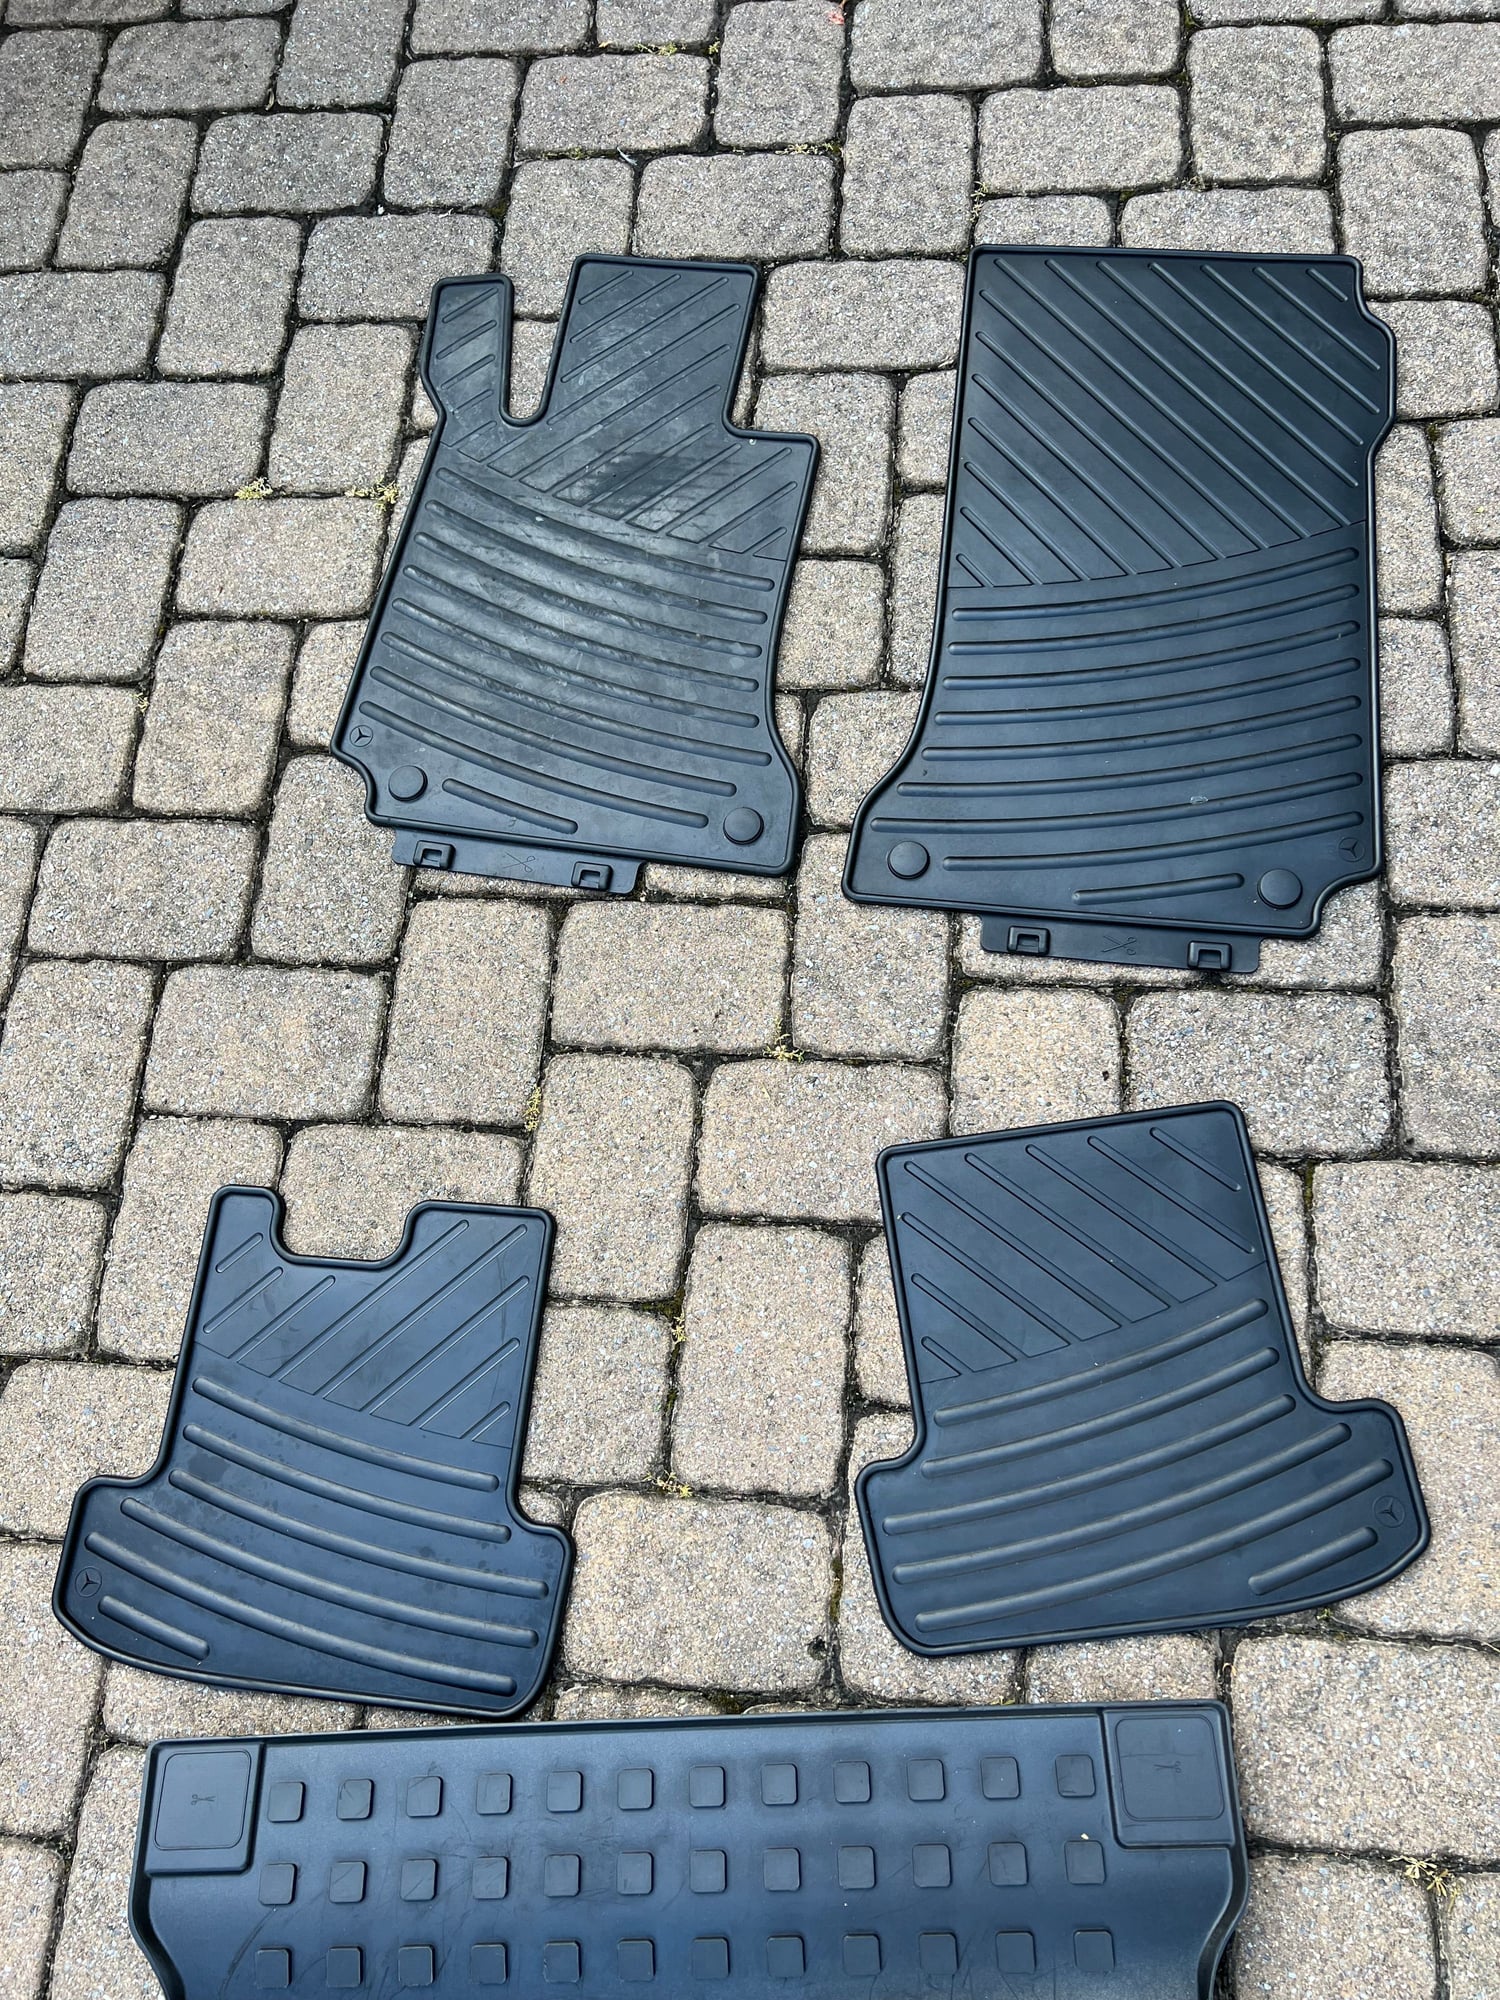 Interior/Upholstery - NJ: W204 C-Class Coupe All Weather Mats and Trunk Mat - Used - 2012 to 2015 Mercedes-Benz C63 AMG - Waldwick, NJ 07463, United States